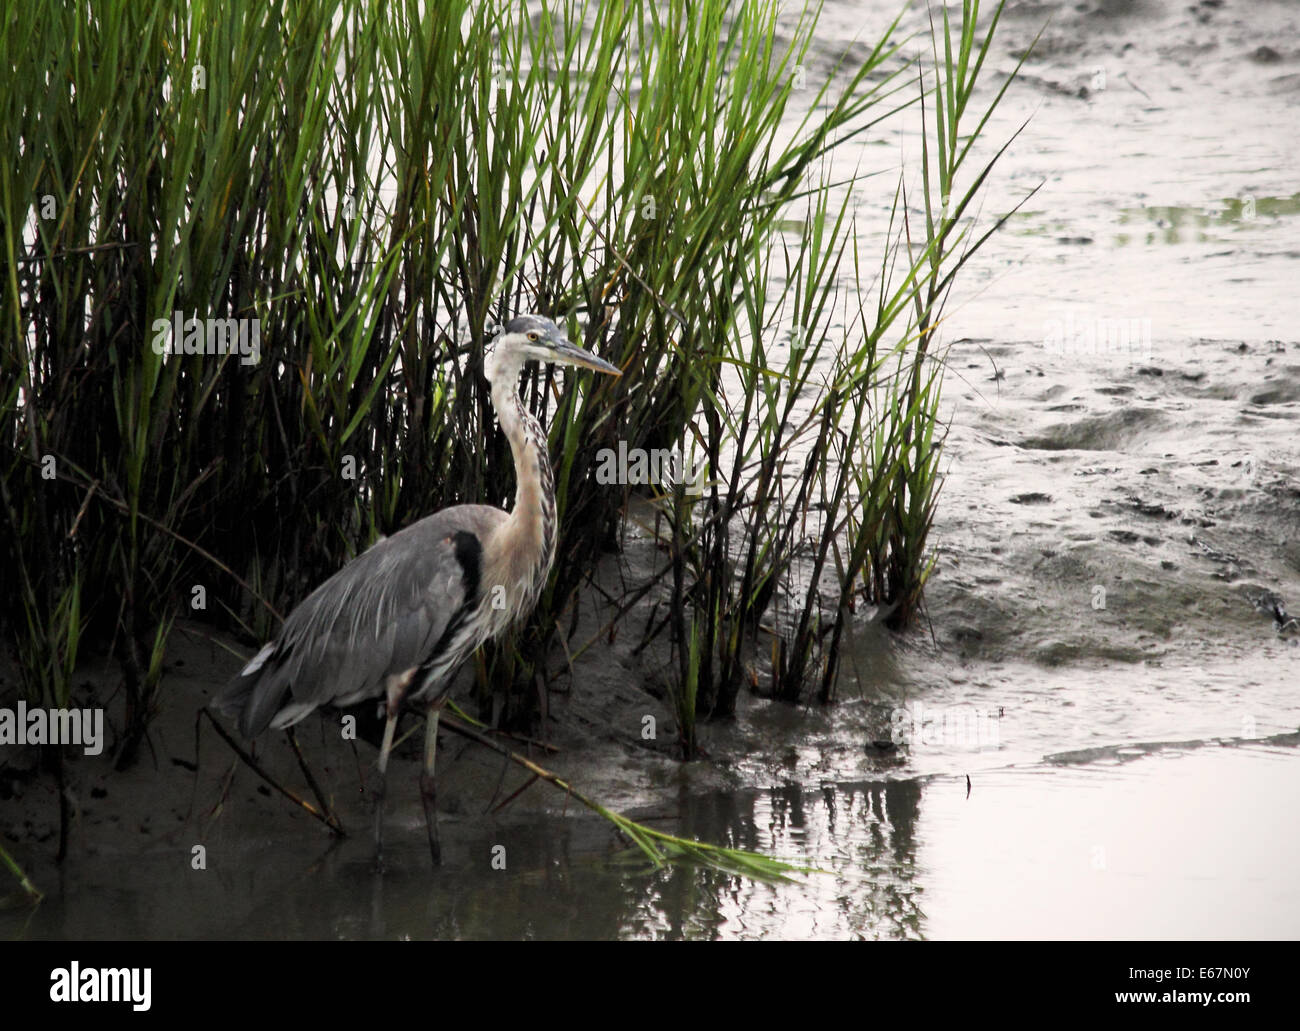 A Great blue heron stands among the spartina grass in a coastal wetland. Stock Photo